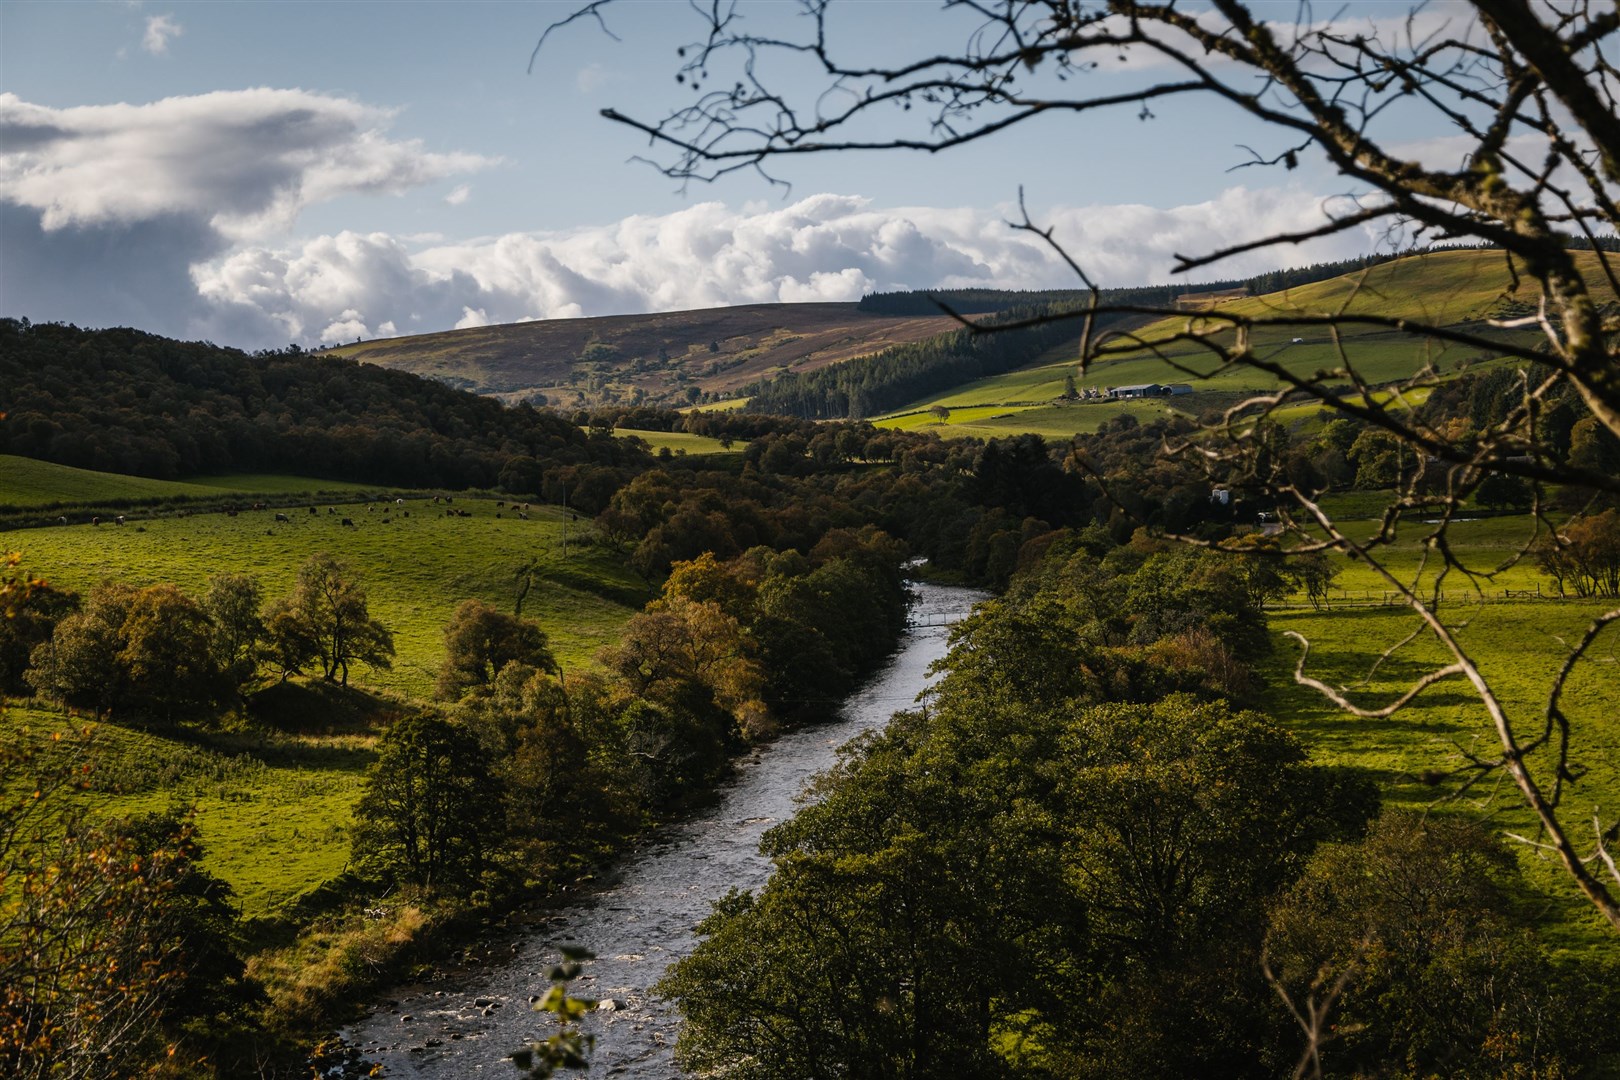 The Glenilvet Estate lies between Cromdale and Ladder Hills in Moray, and falls largely within the Cairngorms National Park. Picture: Grant Anderson